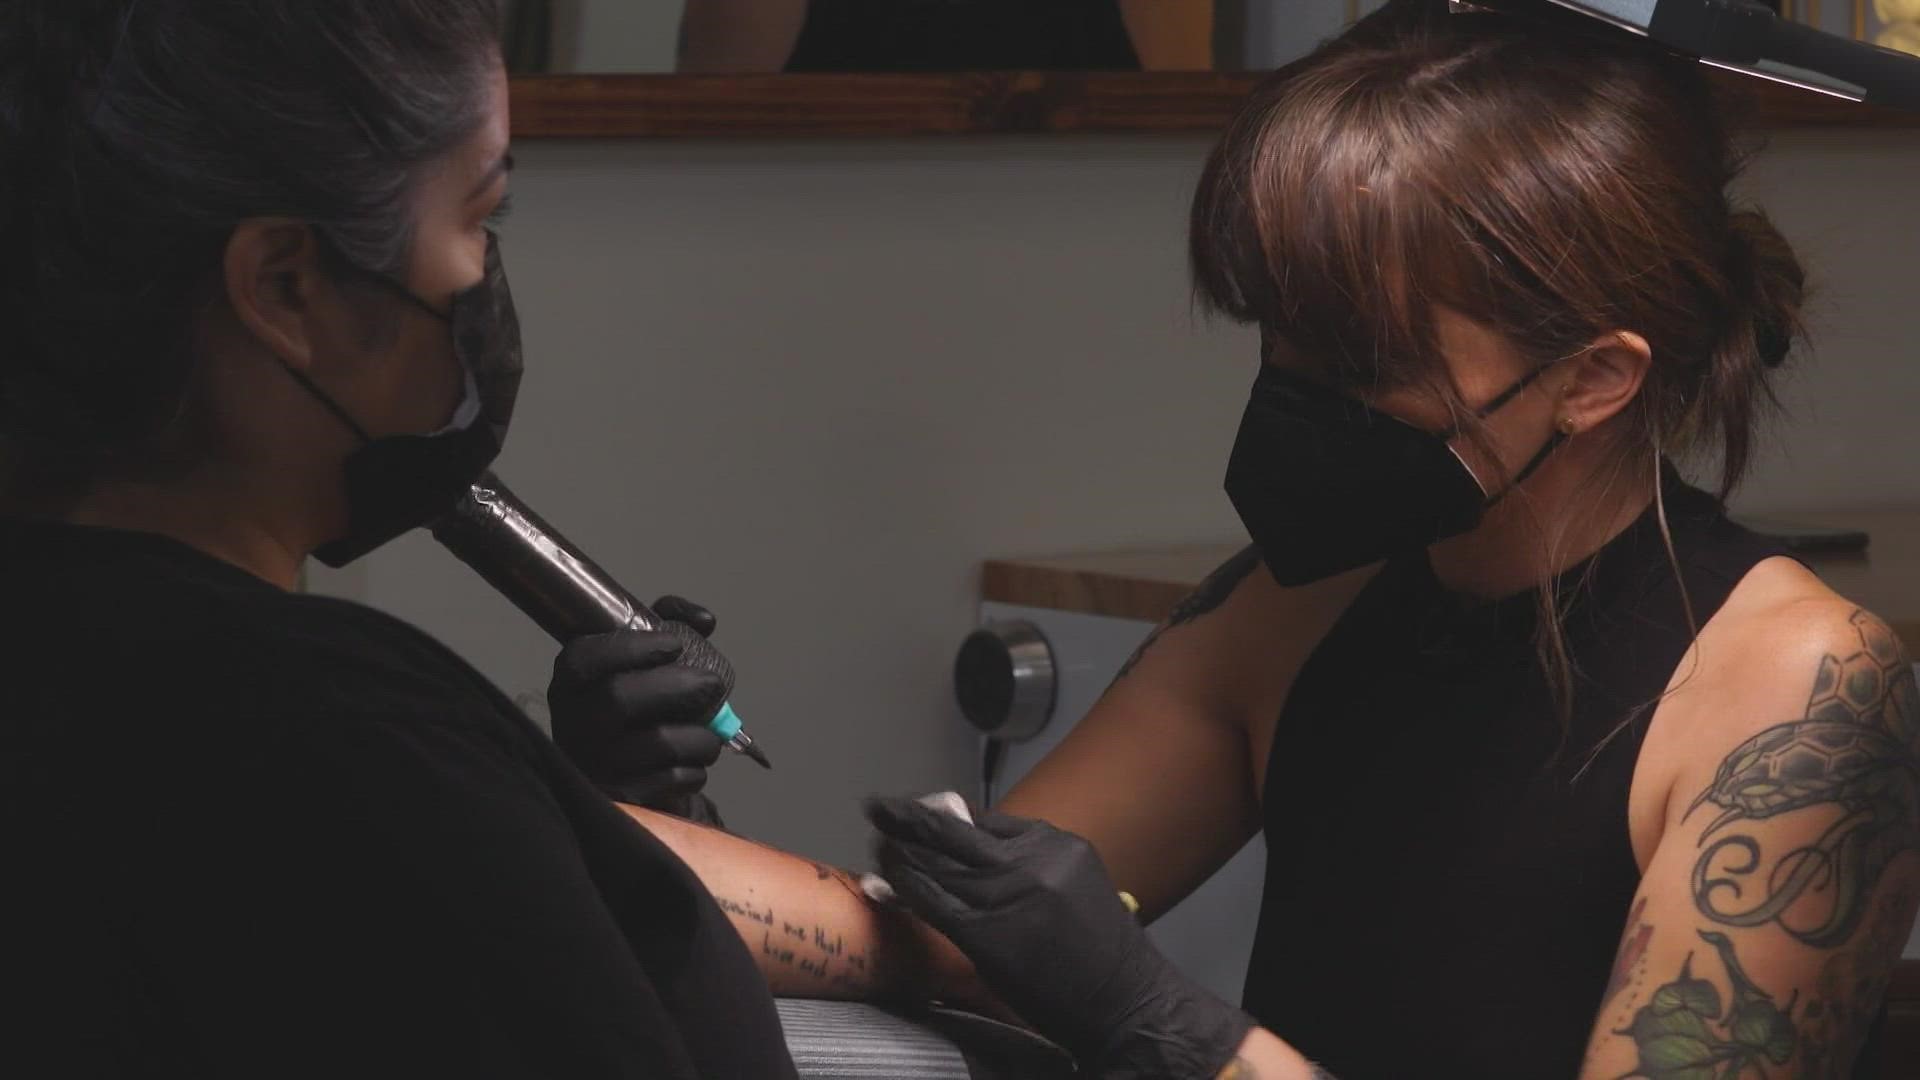 Women-led tattoo business in Dallas looks to make lasting memories through  ink 